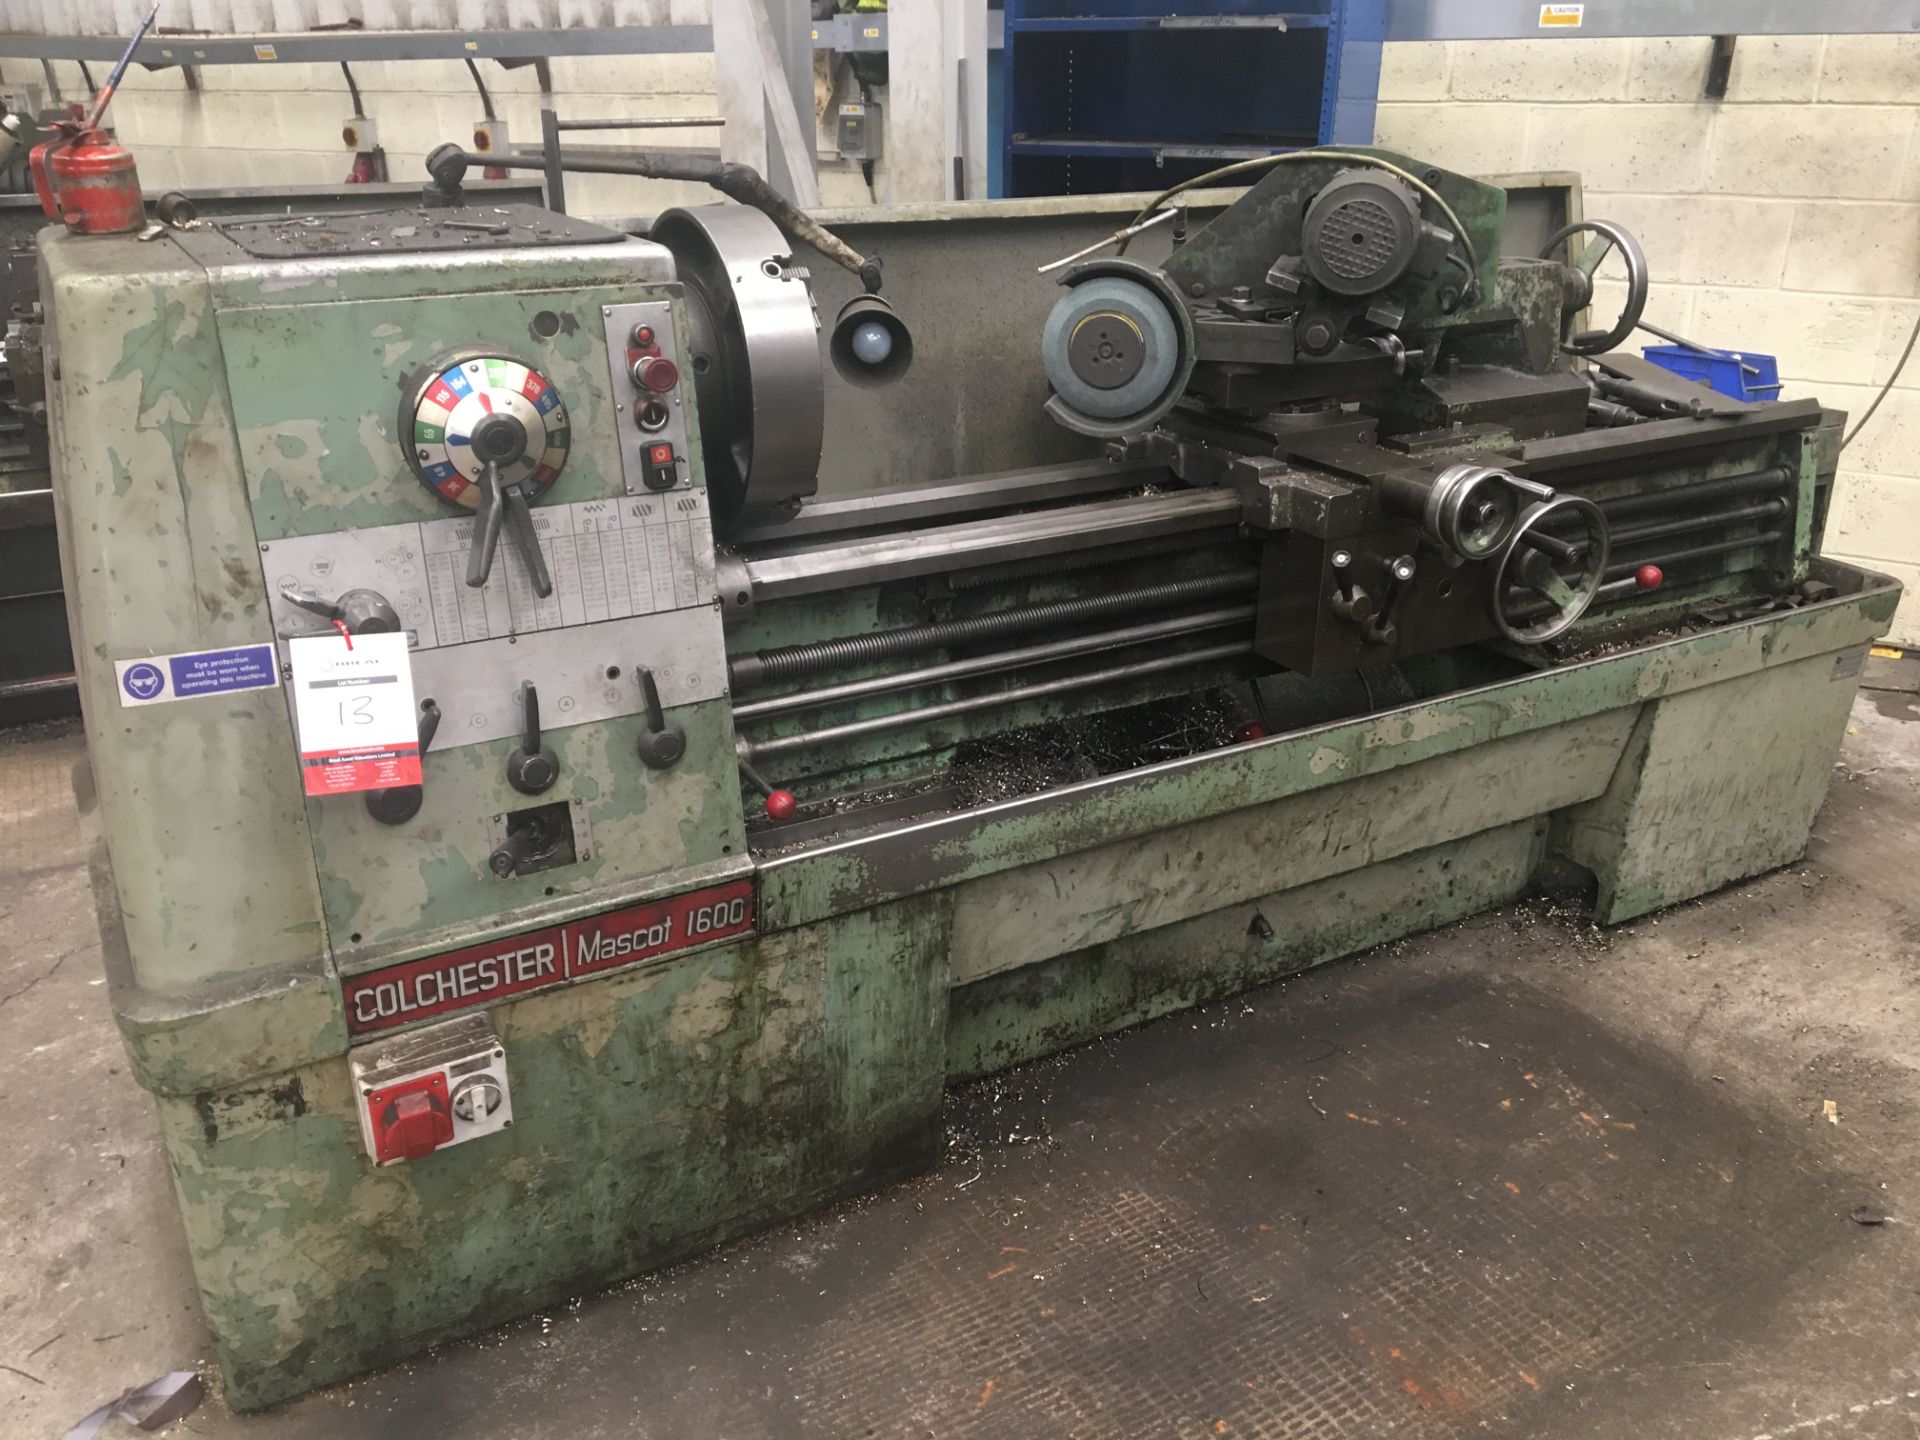 Colchester Mascot 1600 Lathe with Grinding Attachment